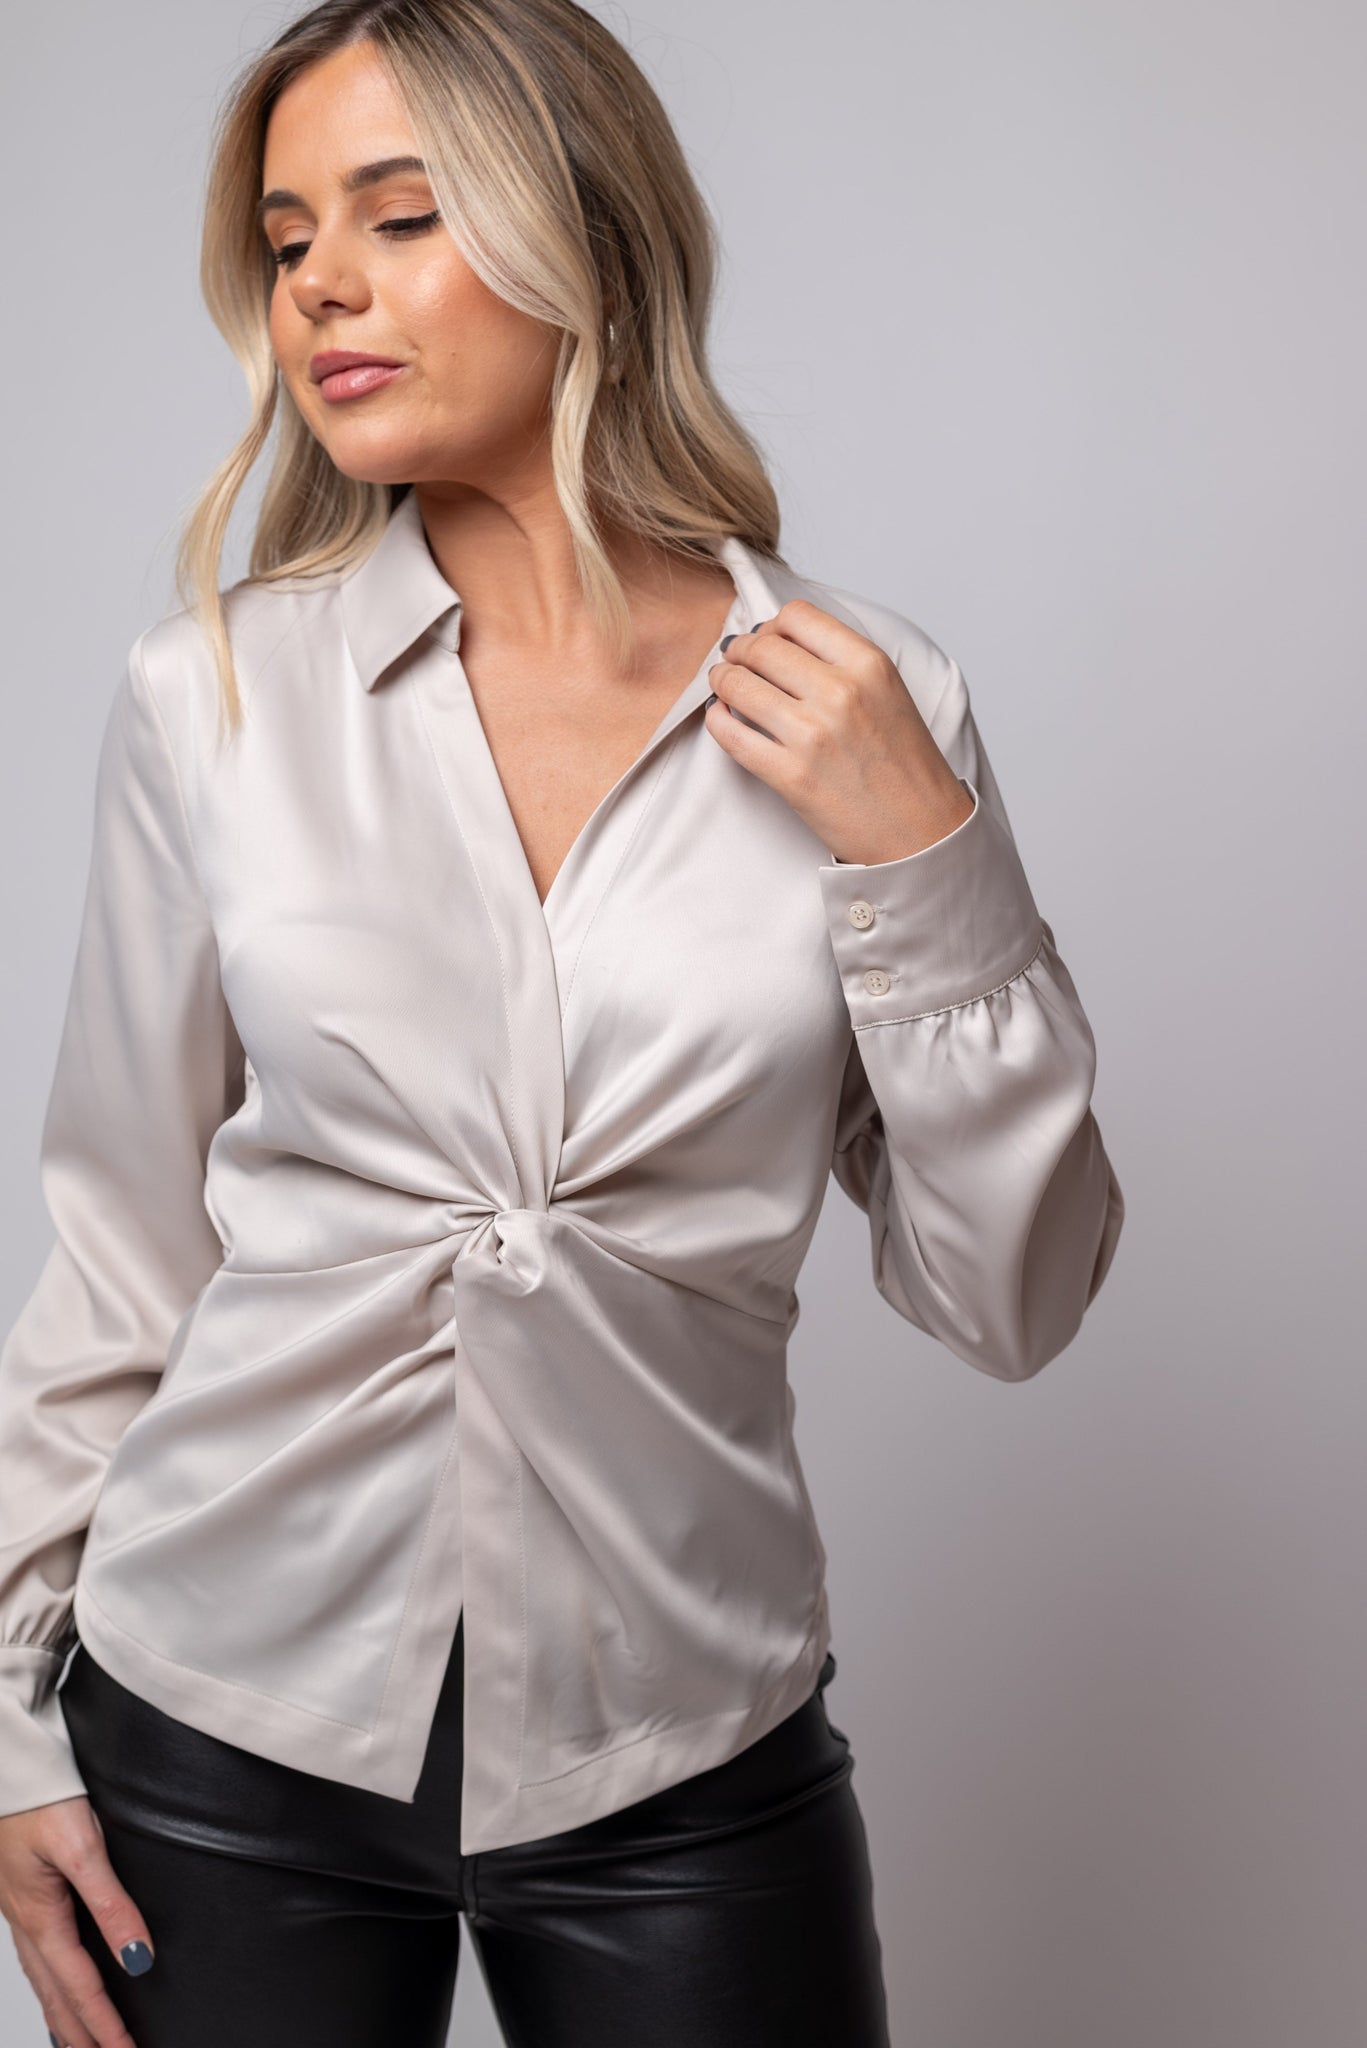 Easy On Me Satin Blouse – Bandit and the Babe